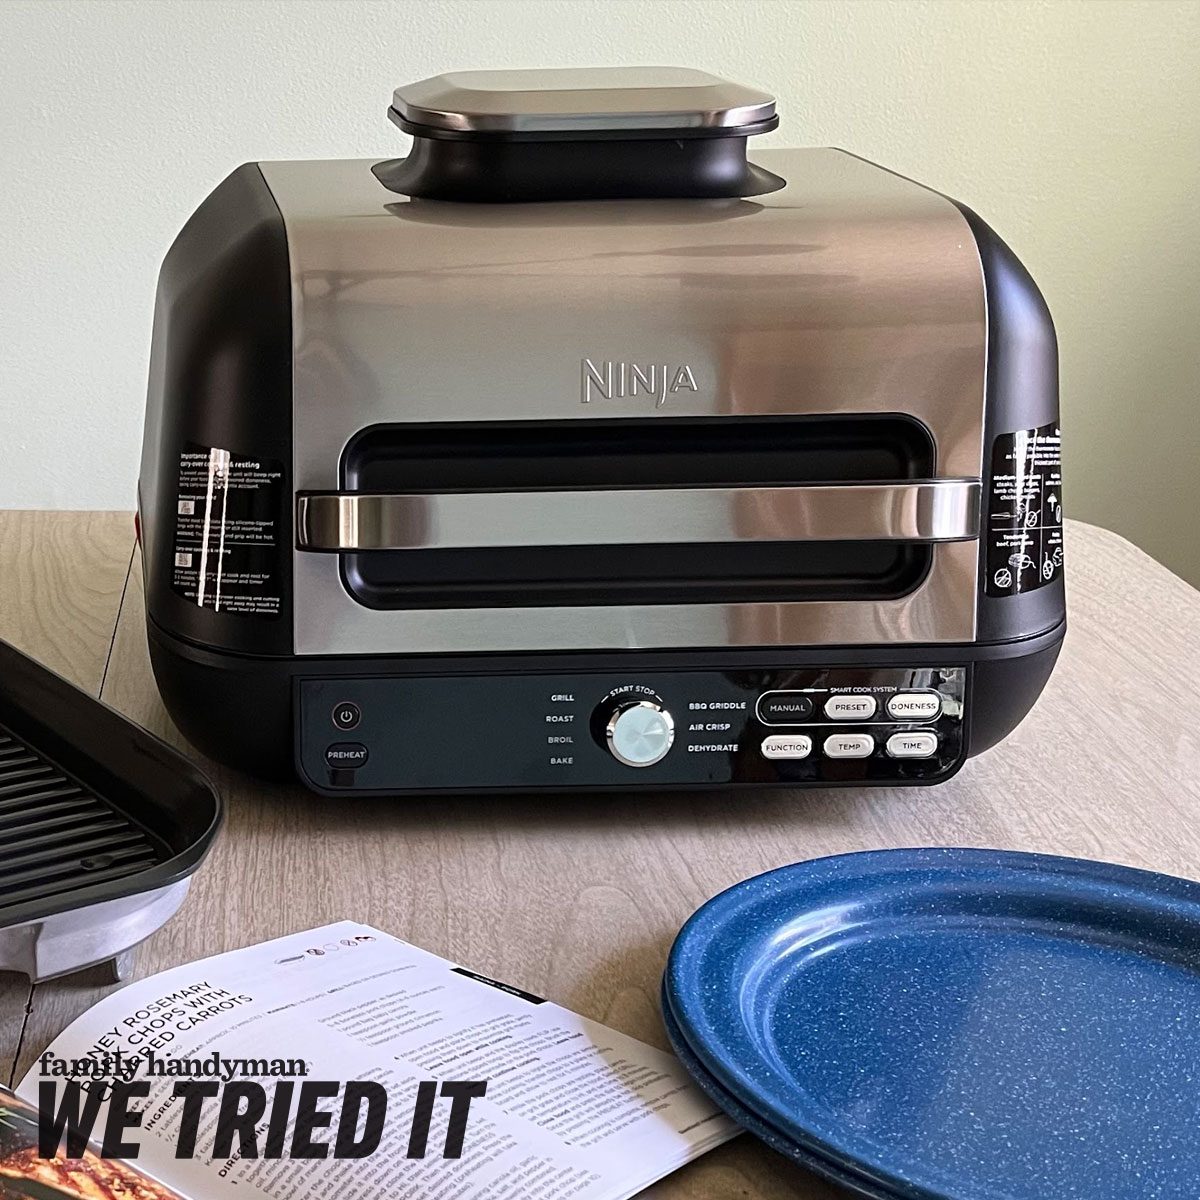 Ninja Foodi 7-in-1 Indoor Grill: A Quick Review of Features and